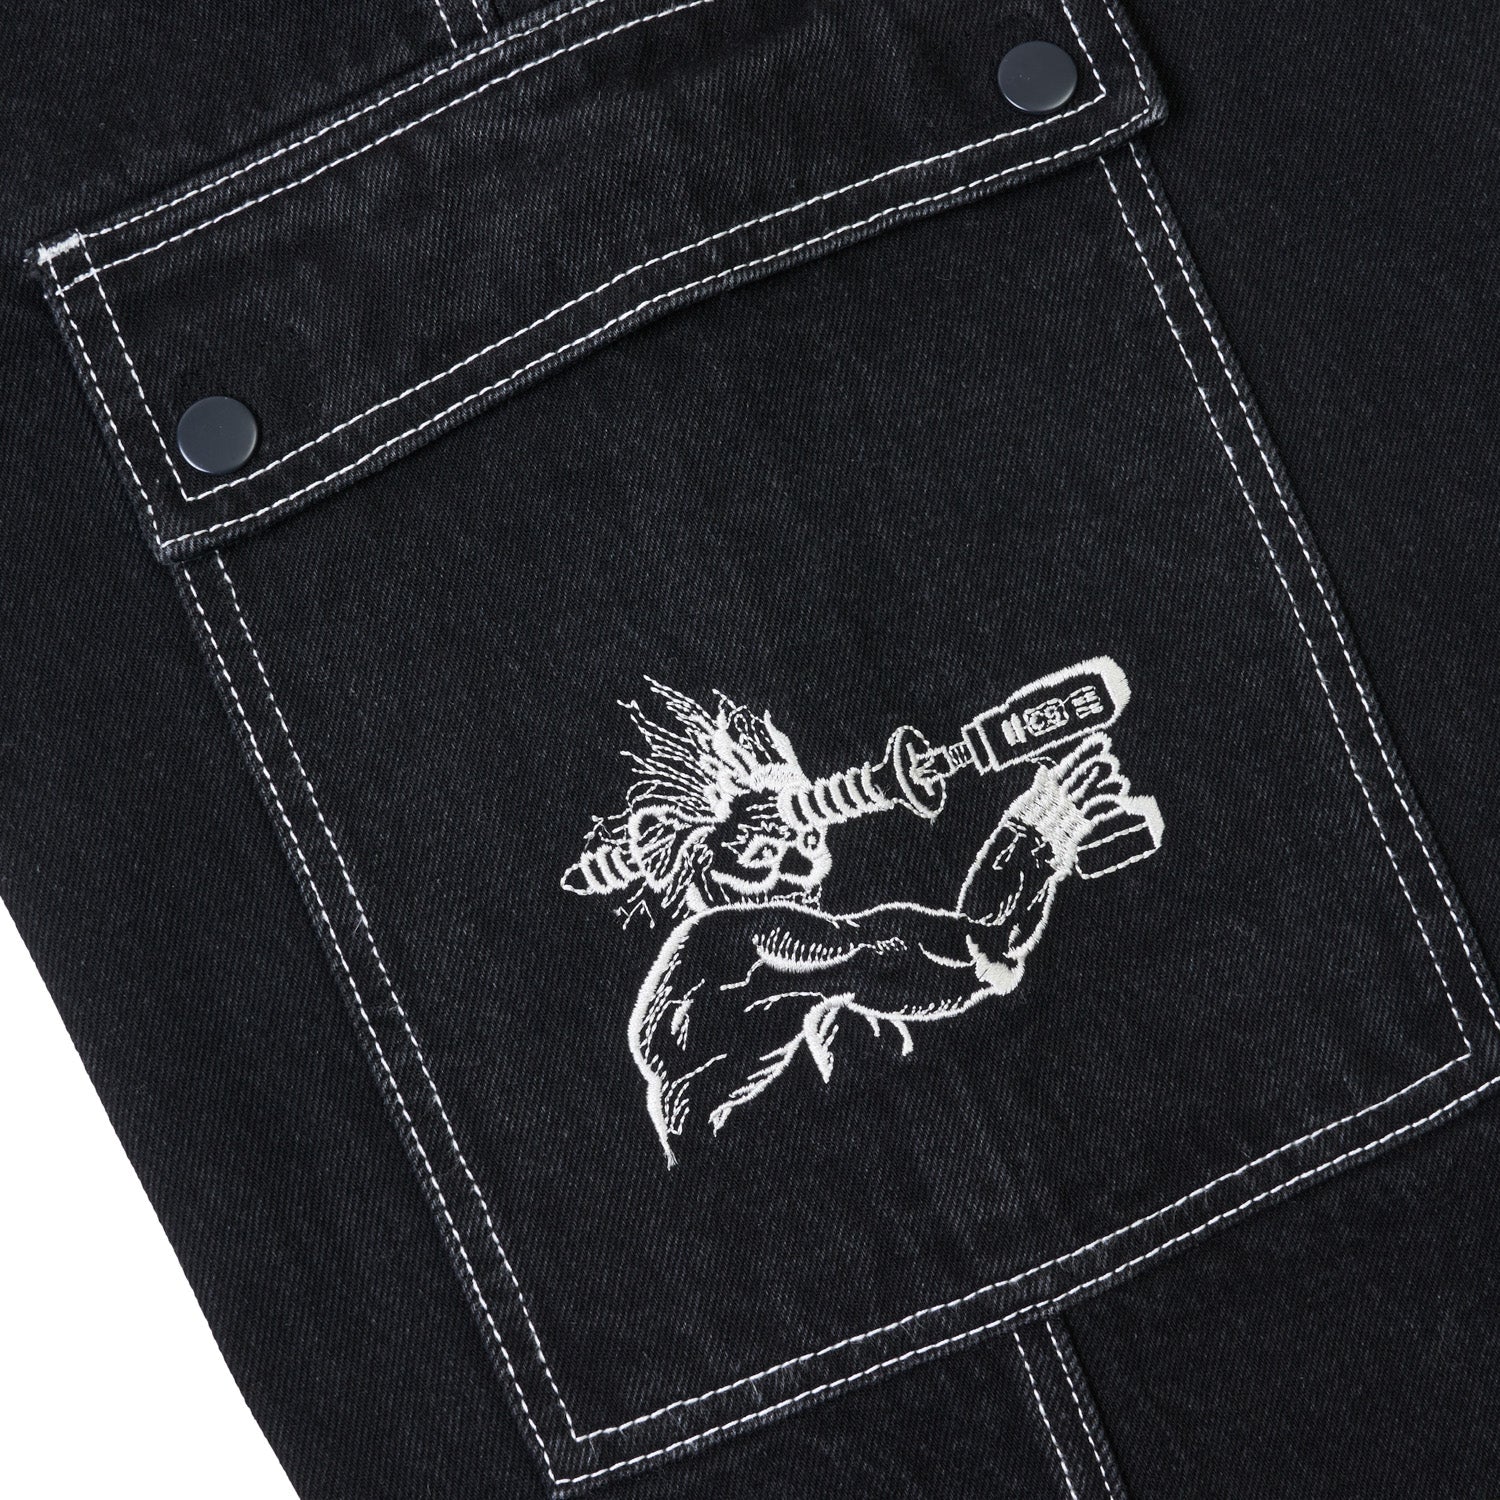 Helix Jeans, Washed Black